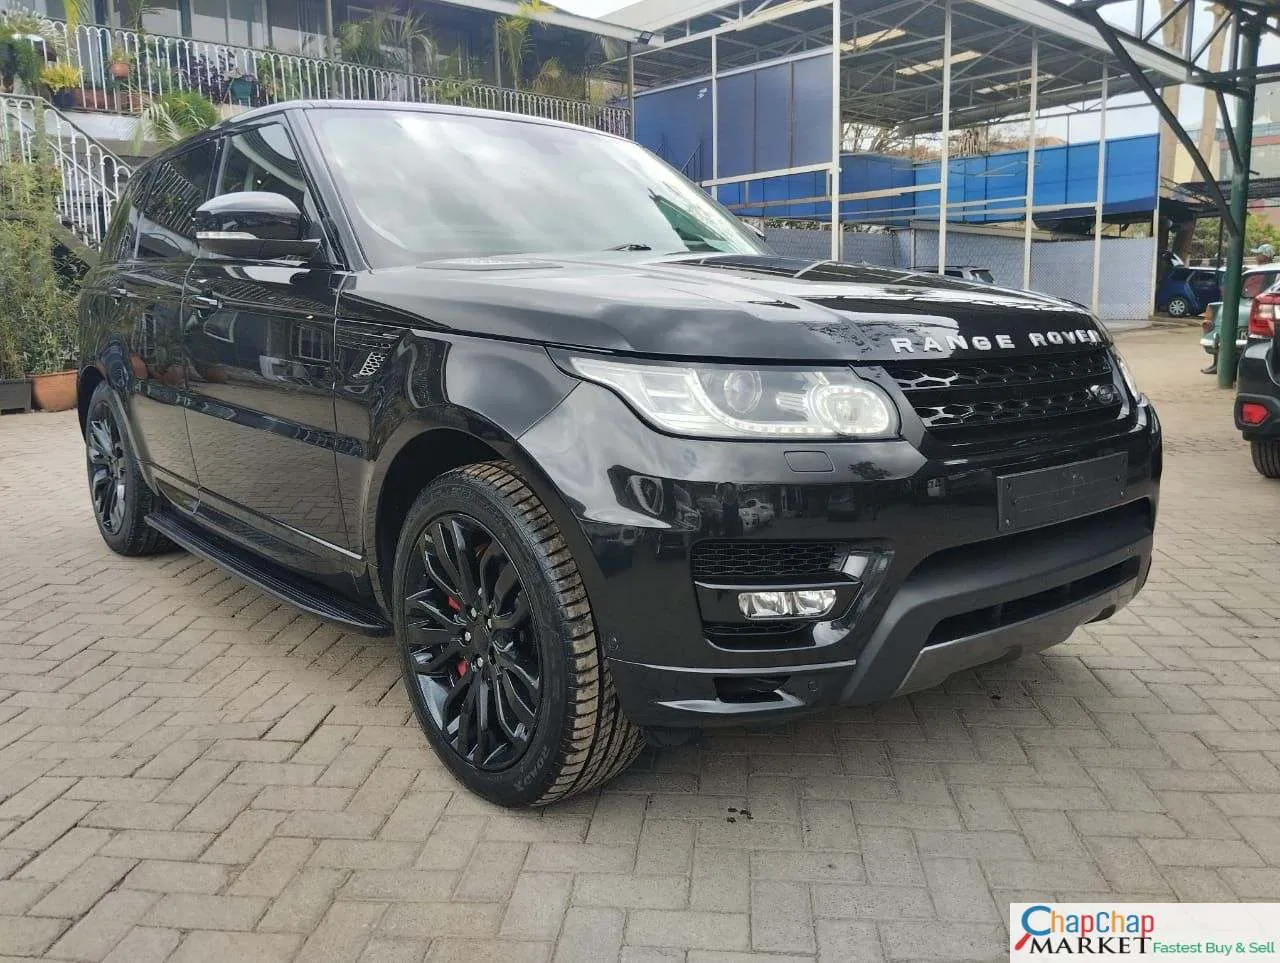 Cars Cars For Sale-Range Rover Sport for sale in Kenya AUTOBIOGRAPHY You pay 30% deposit Trade in OK EXCLUSIVE hire purchase installments 9